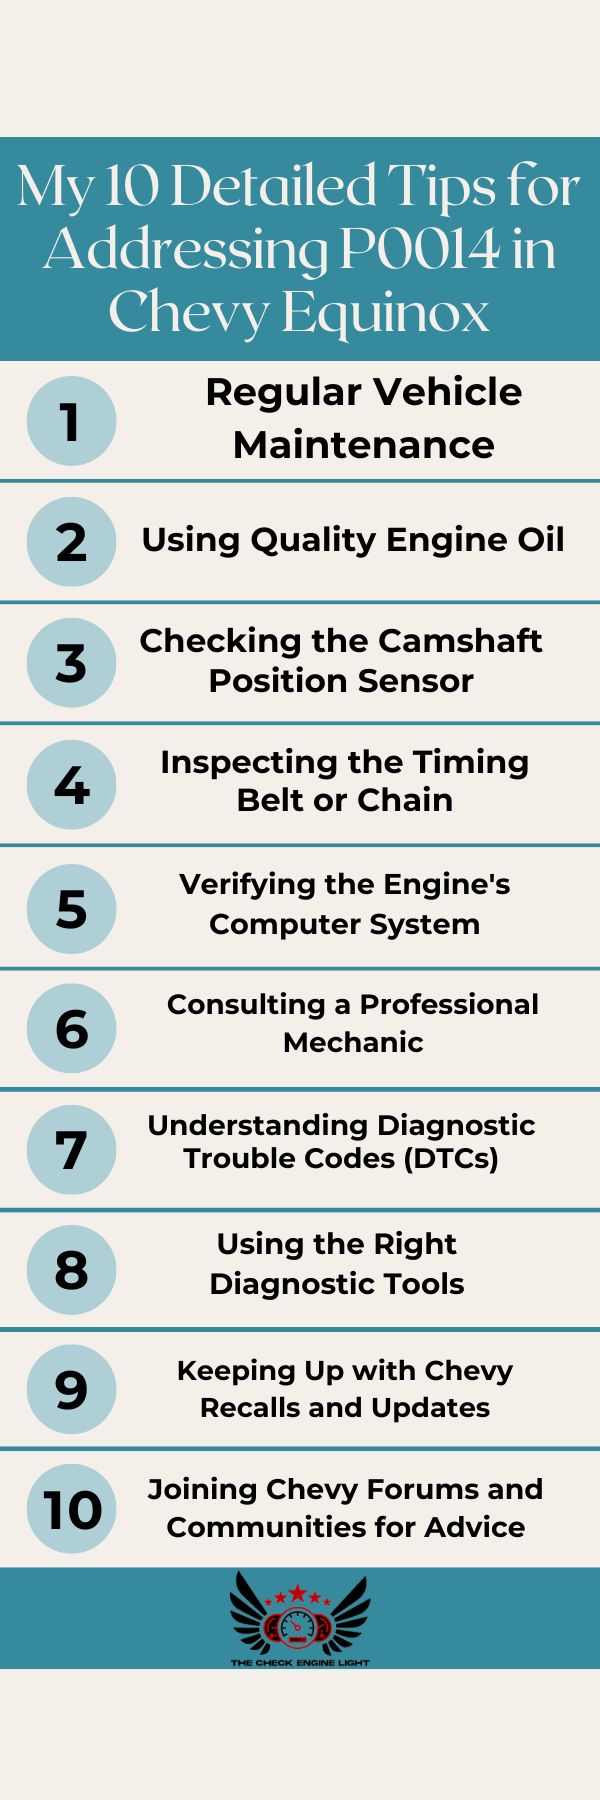 infographic for My 10 Detailed Tips for Addressing P0014 in Chevy Equinox